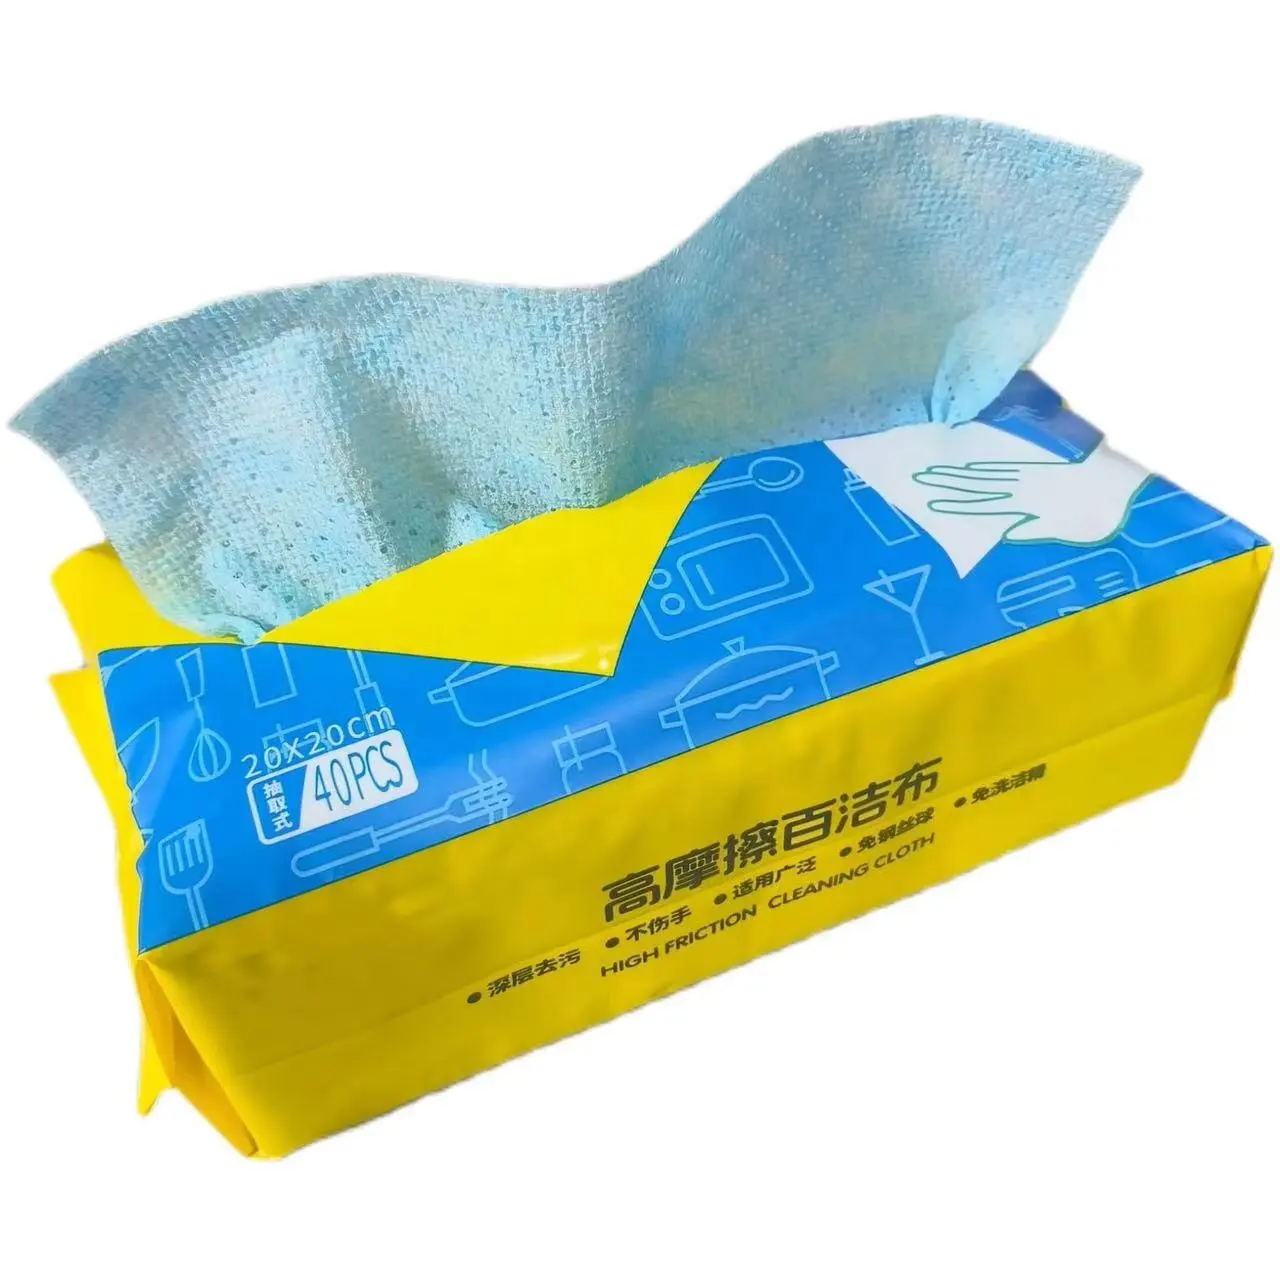 Cleaning Wipes and Tissues Dry and Dual-use Kitchen pp Non-woven Fabric Cloth